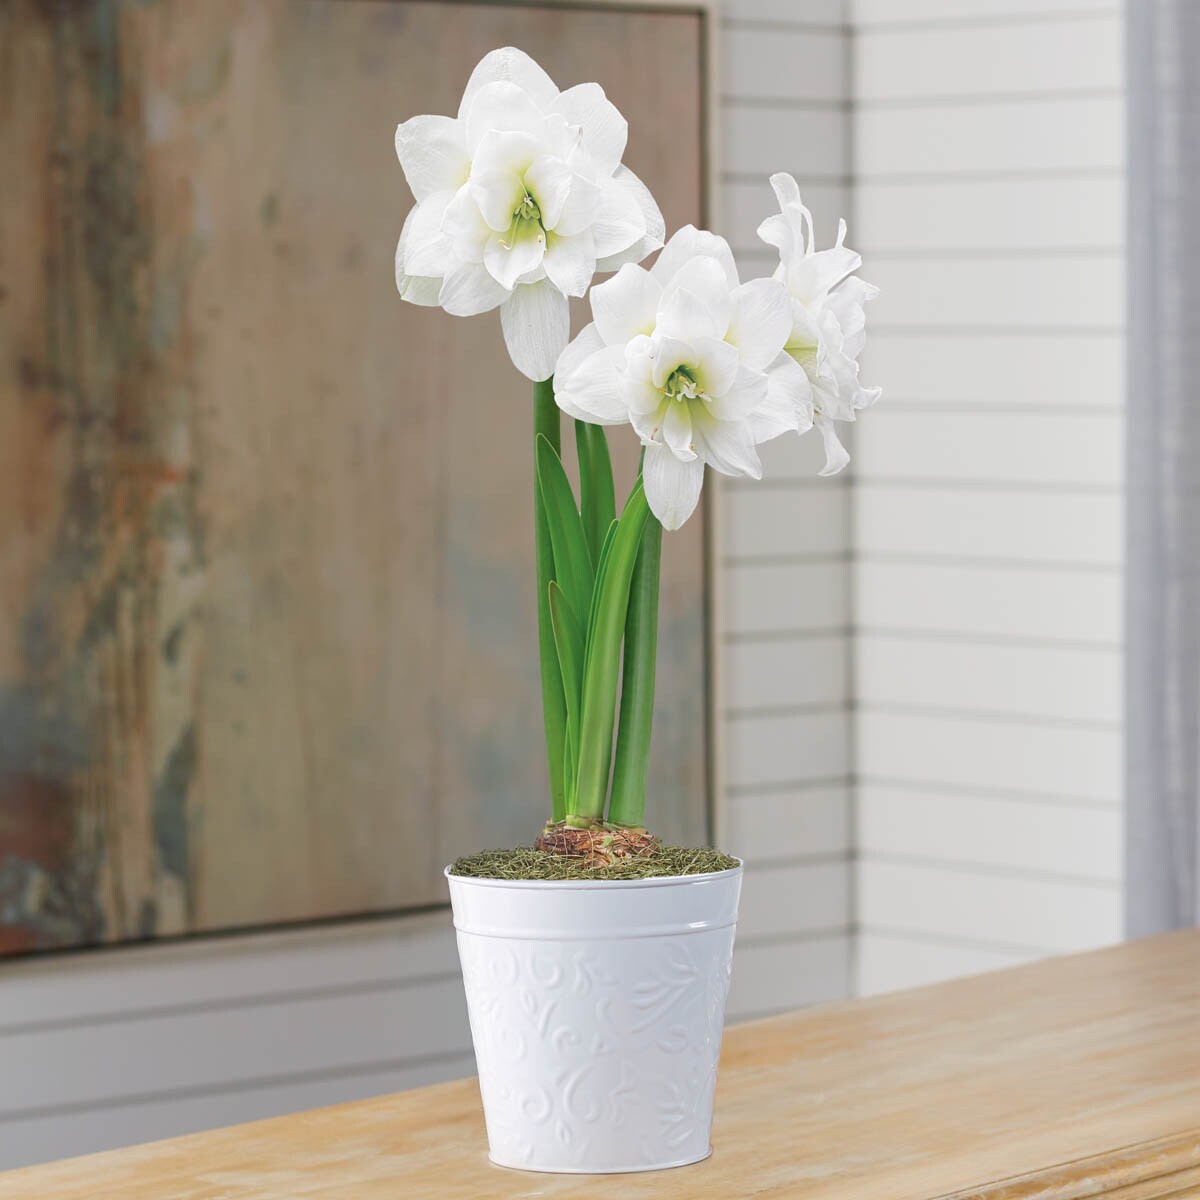 Details about   Marquis Amaryllis Double White Bloom Green Leaves Medium Size Bulb 